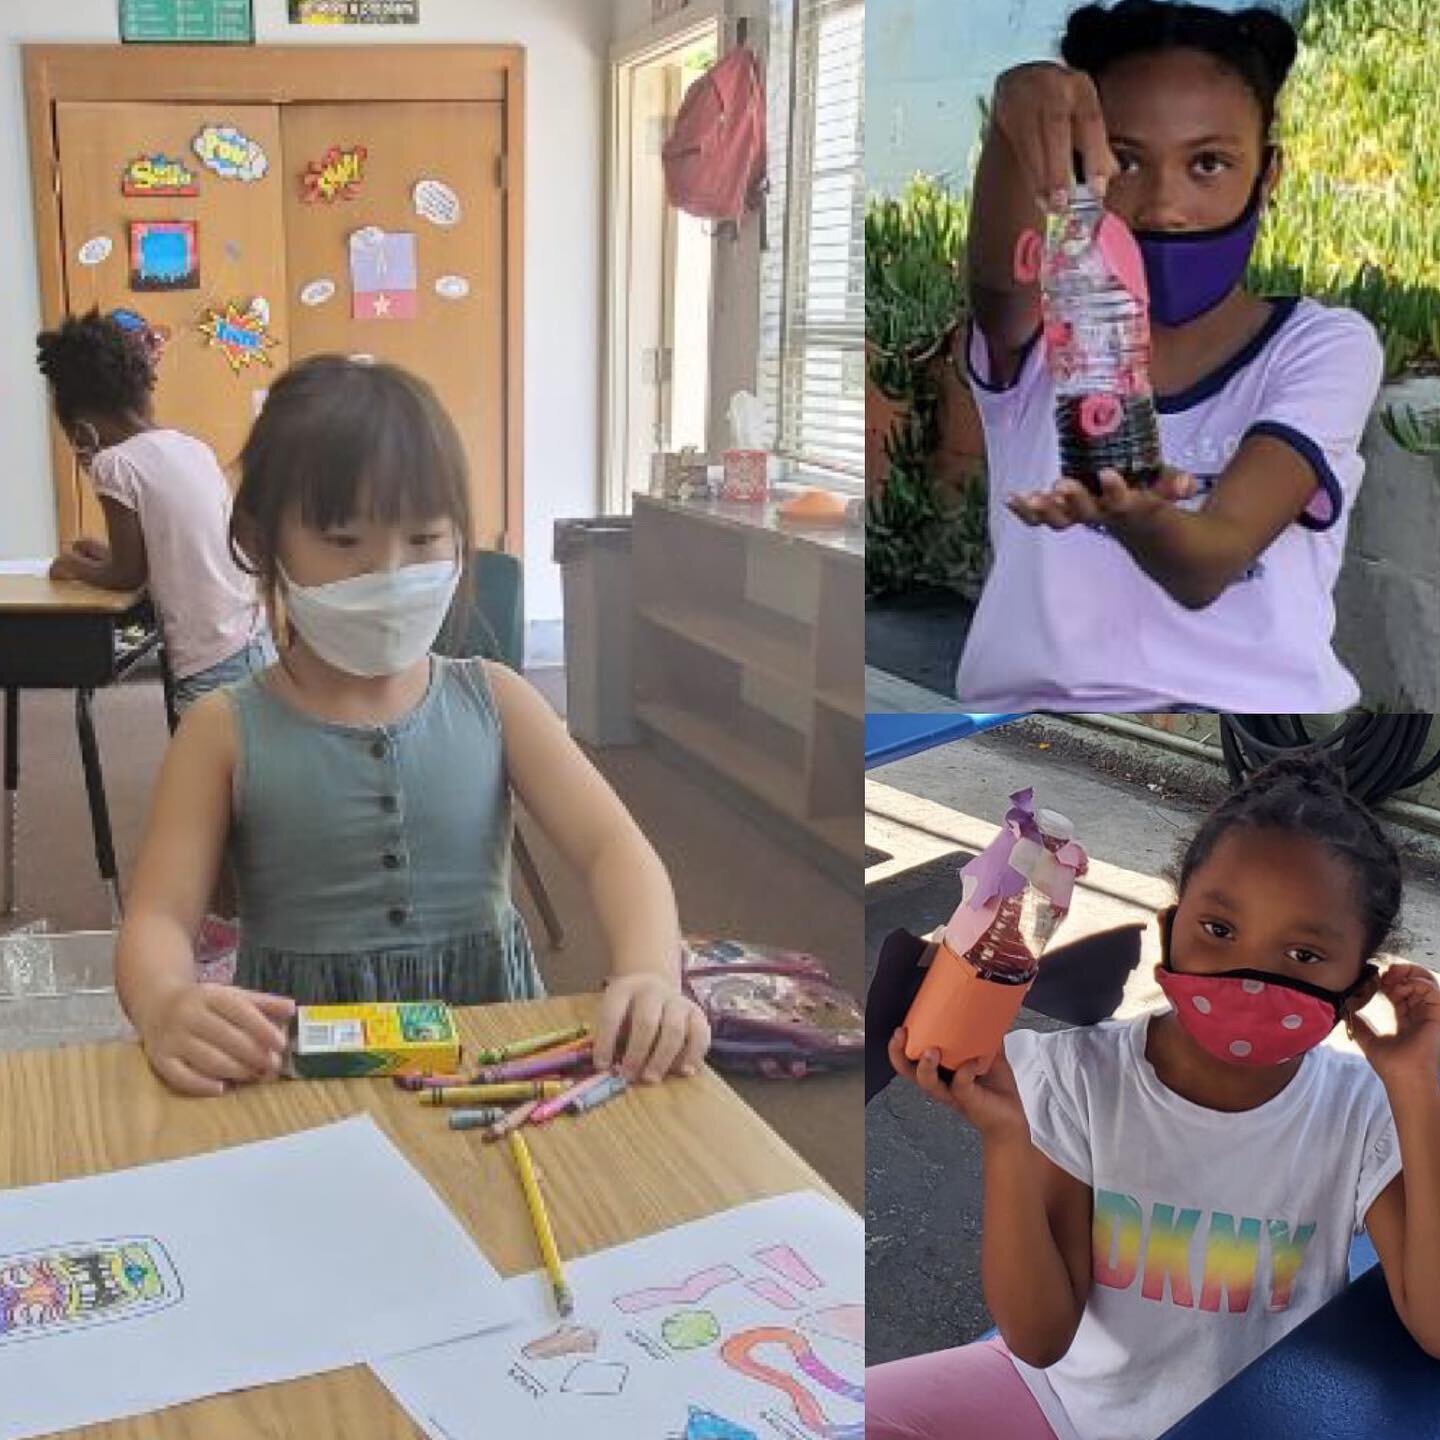 Summer Camp 2020! We are offering private tutoring, virtual classes and in person camps.  #bestsummercampever #lausd #virtuallearning #cb4kids